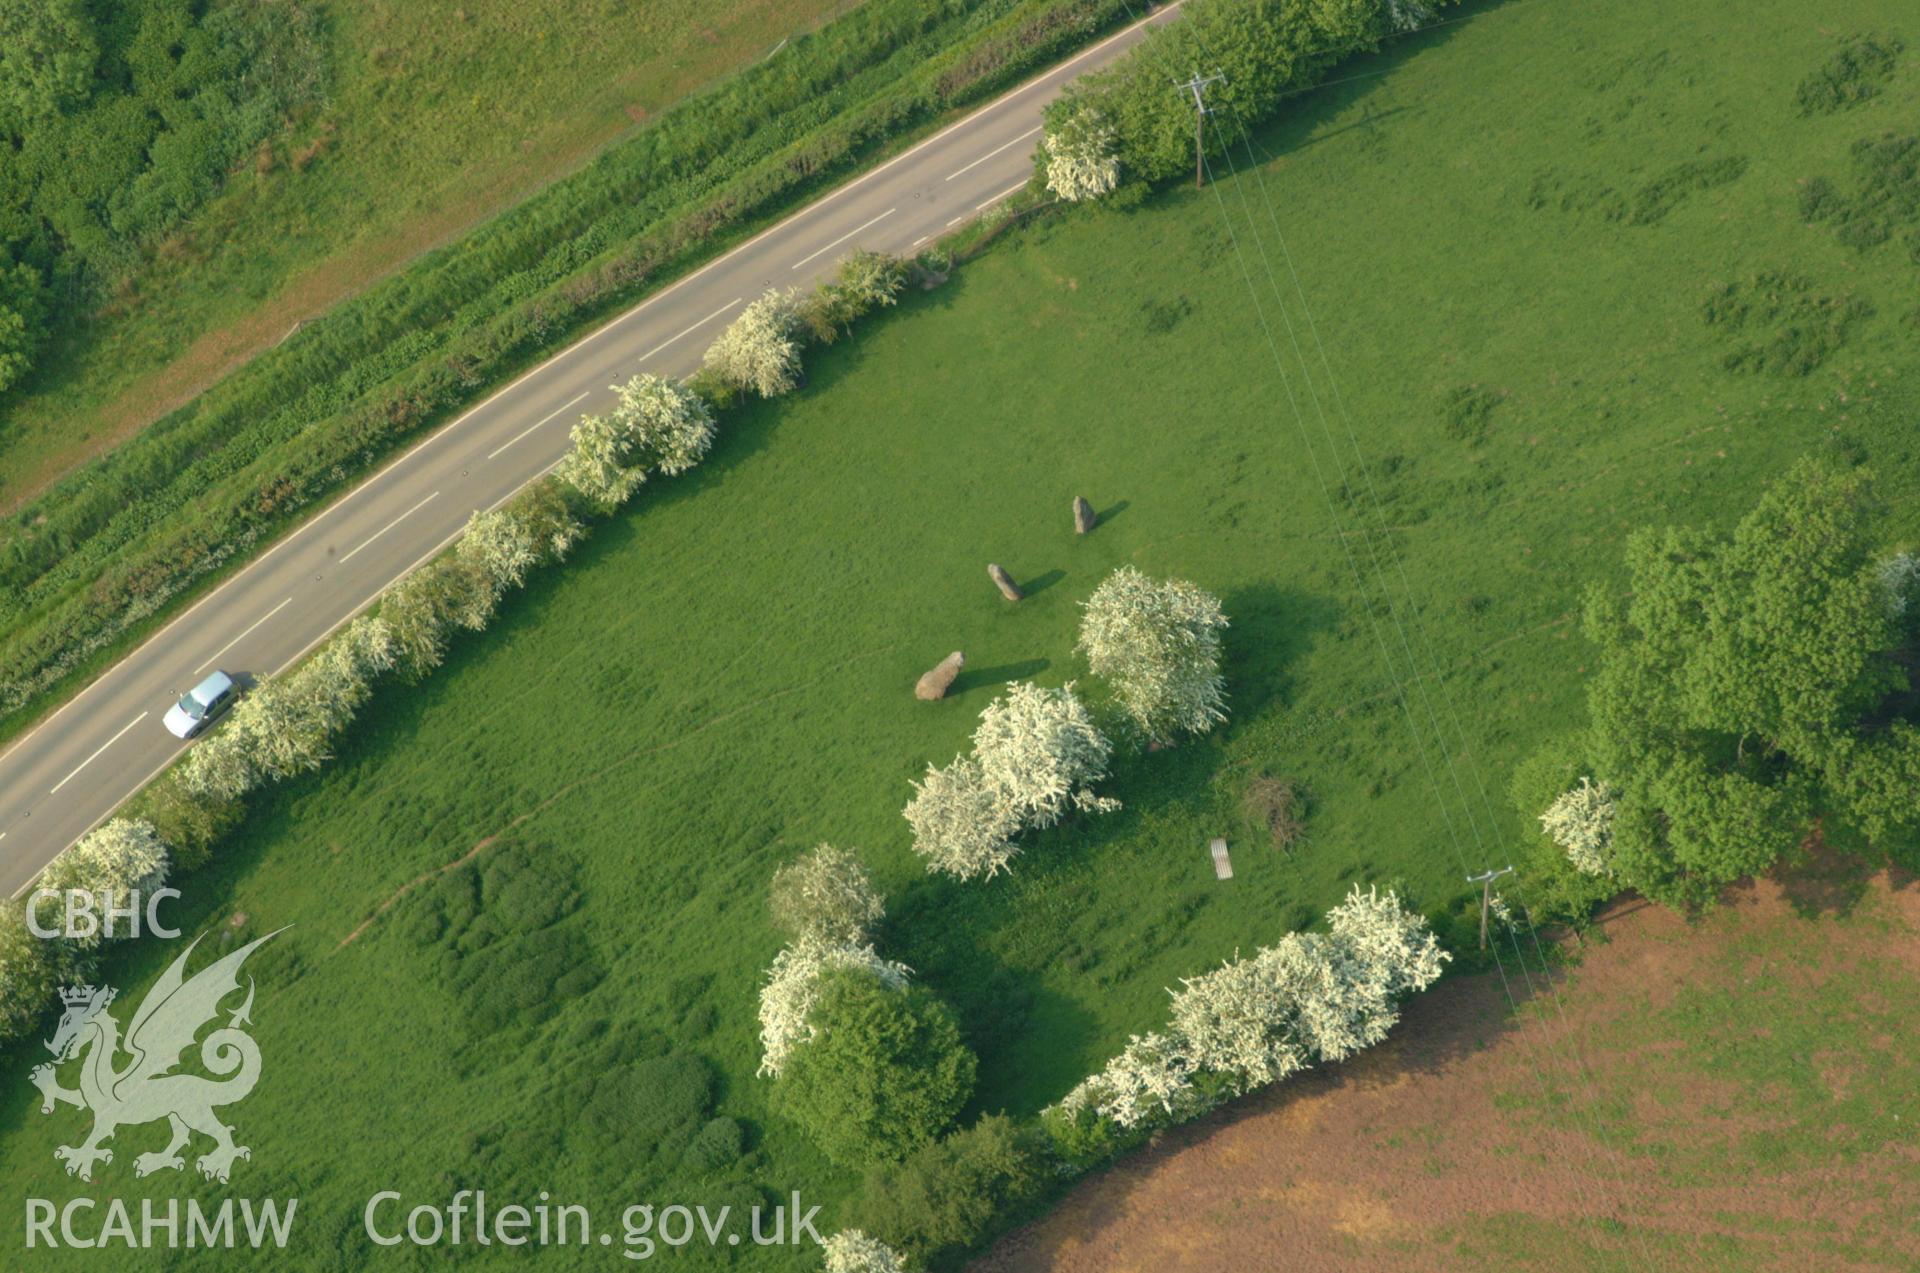 RCAHMW colour oblique aerial photograph of Harold's Stones, Trellech taken on 27/05/2004 by Toby Driver